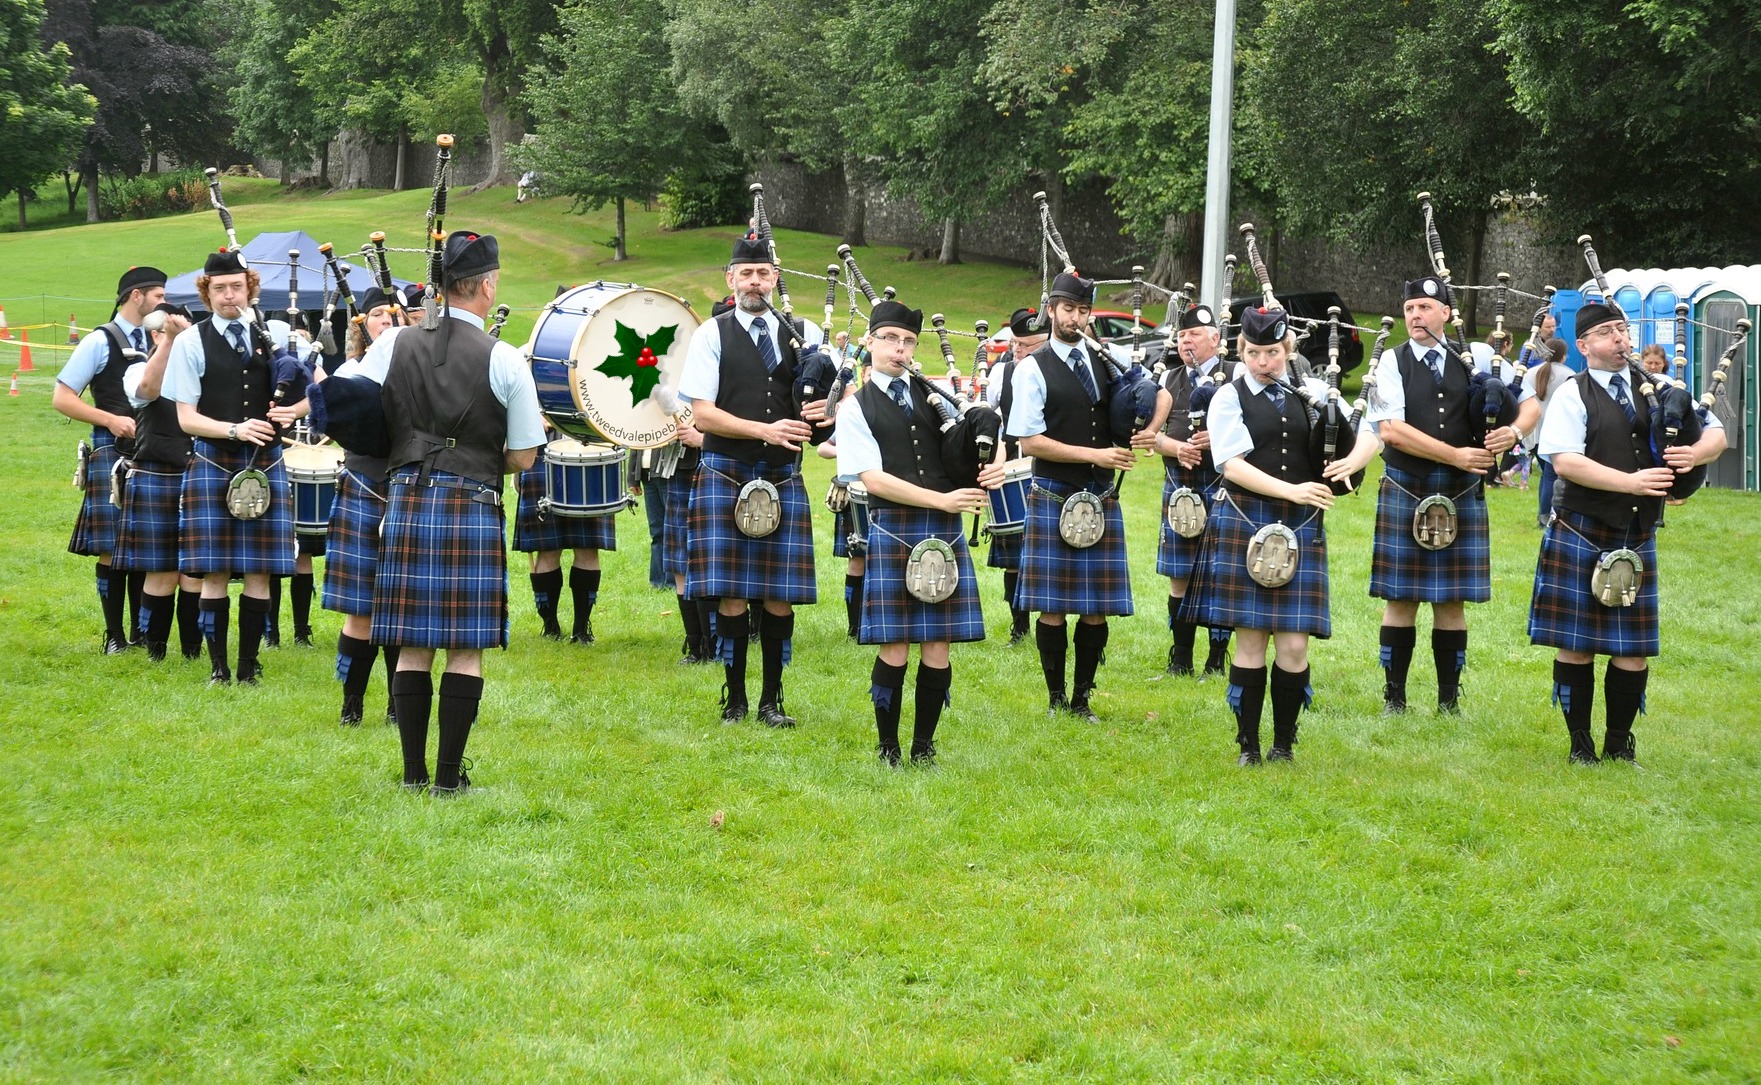 A group of bagpipe players performing in a field